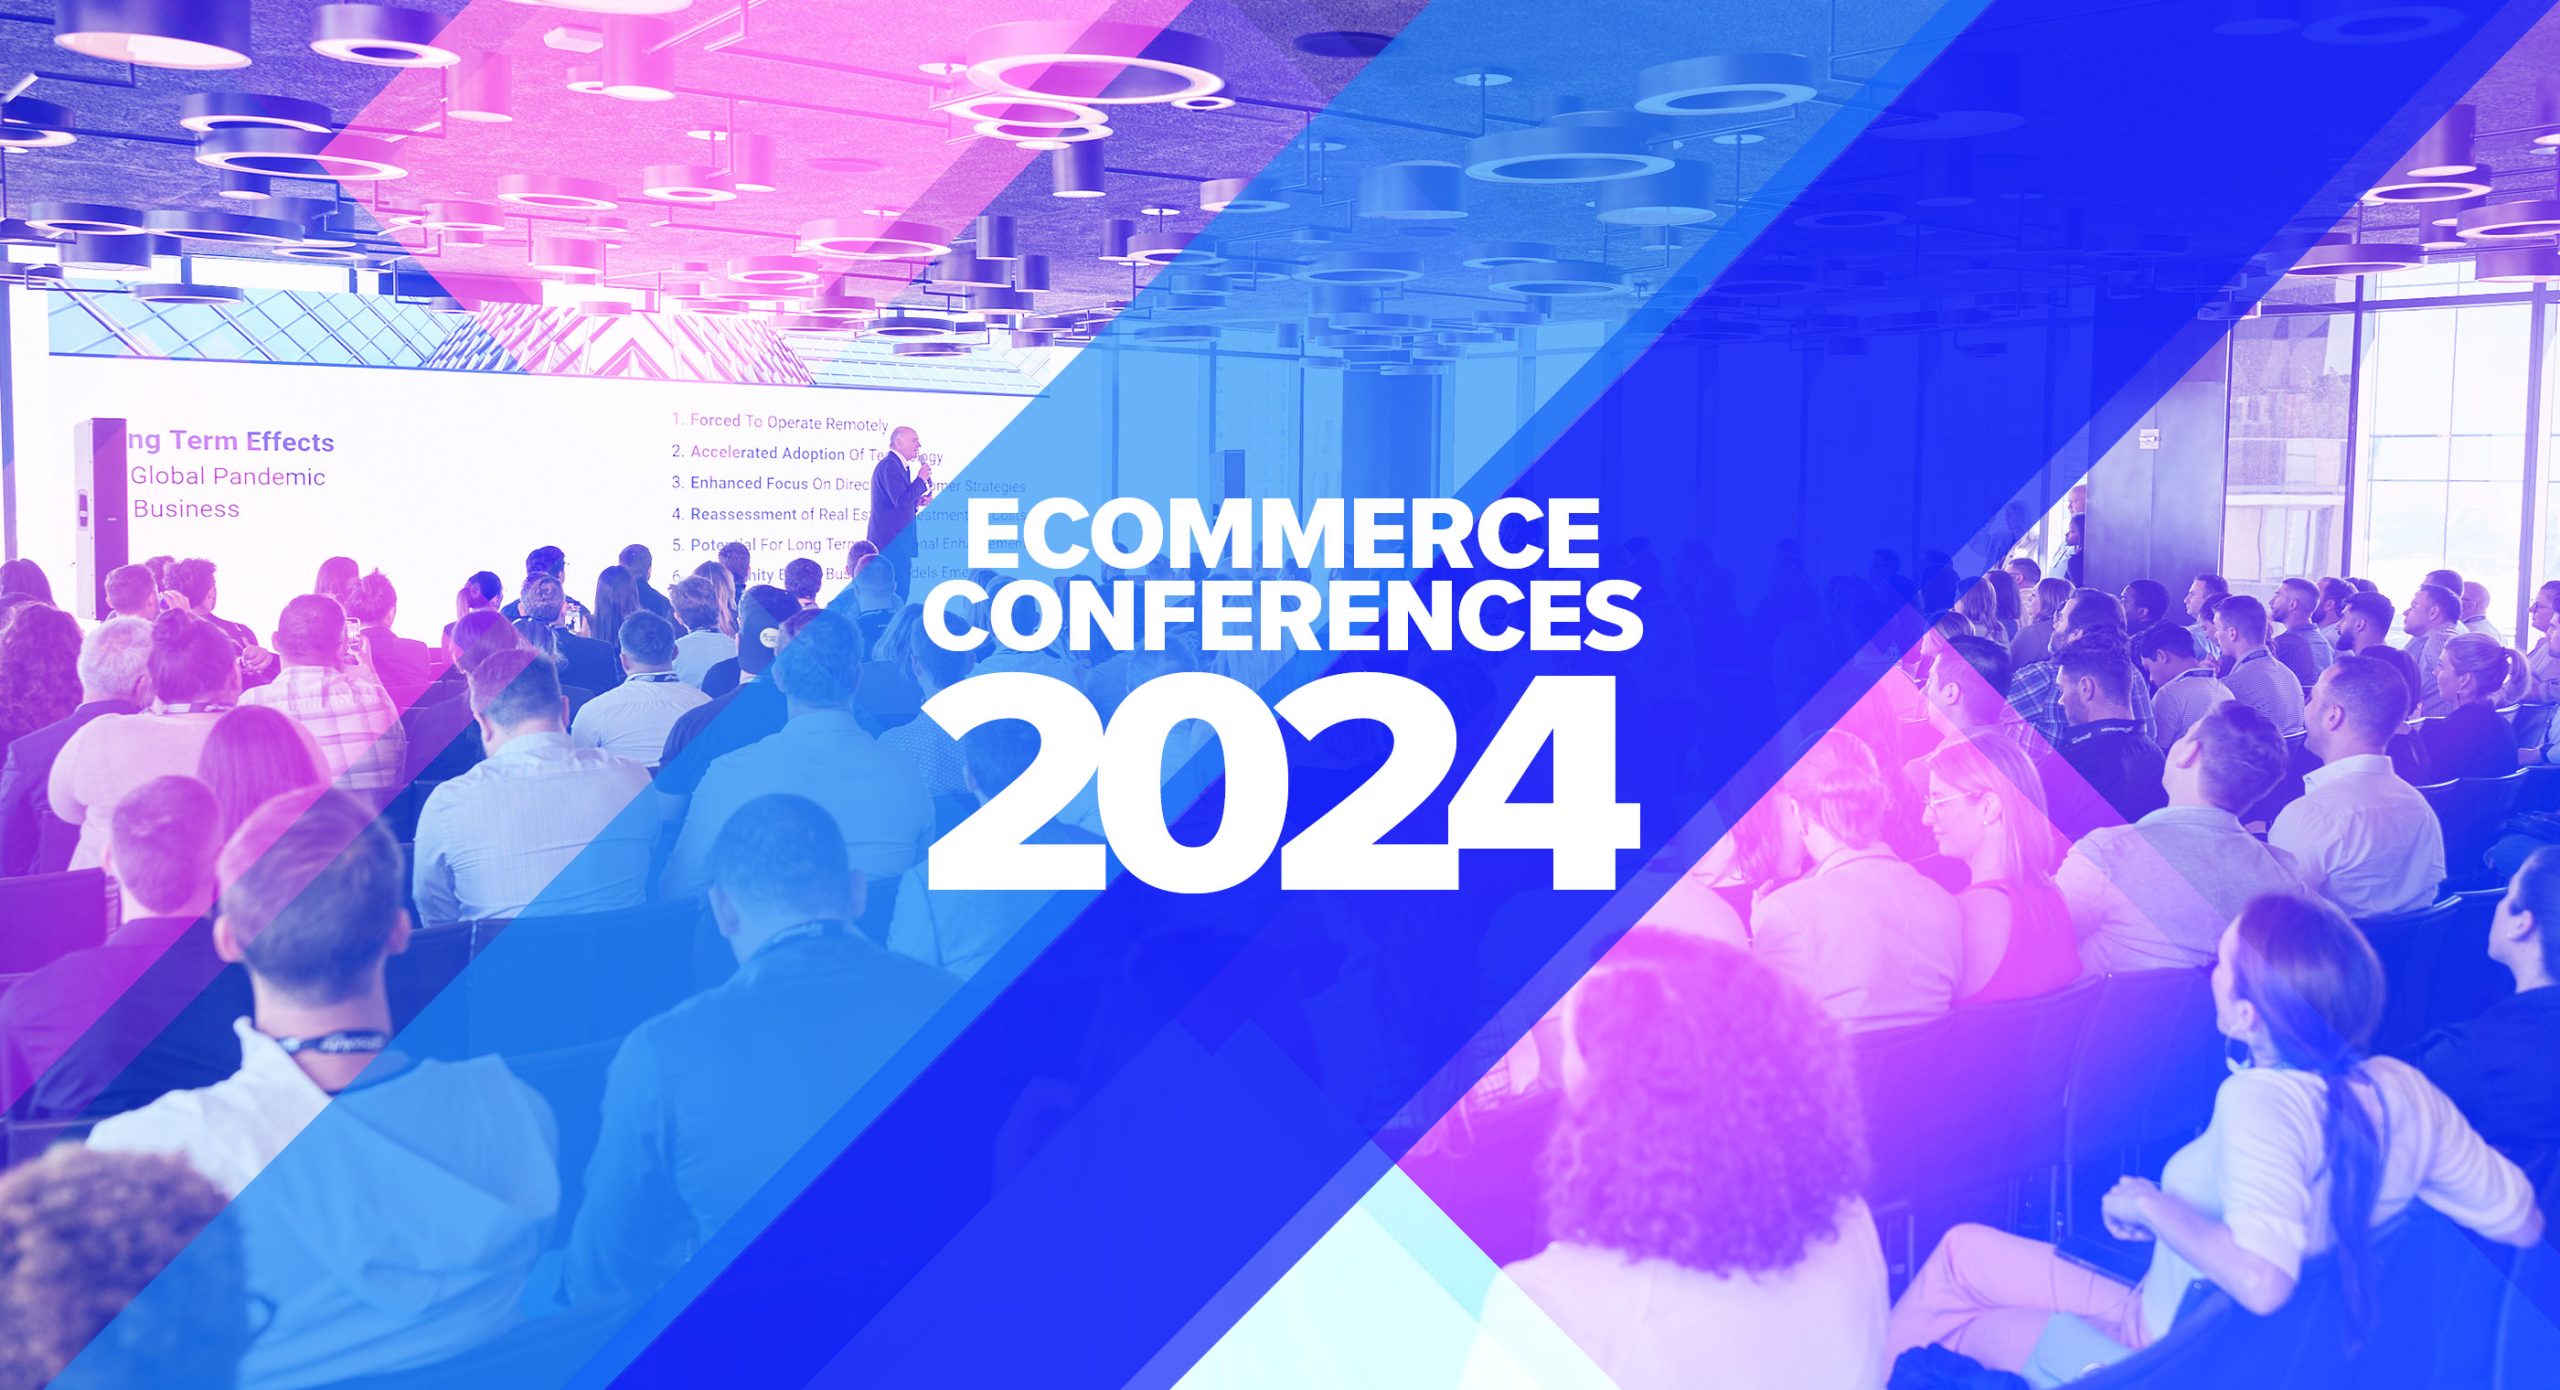 Top Conferences and Marketing Events to Attend in 2024